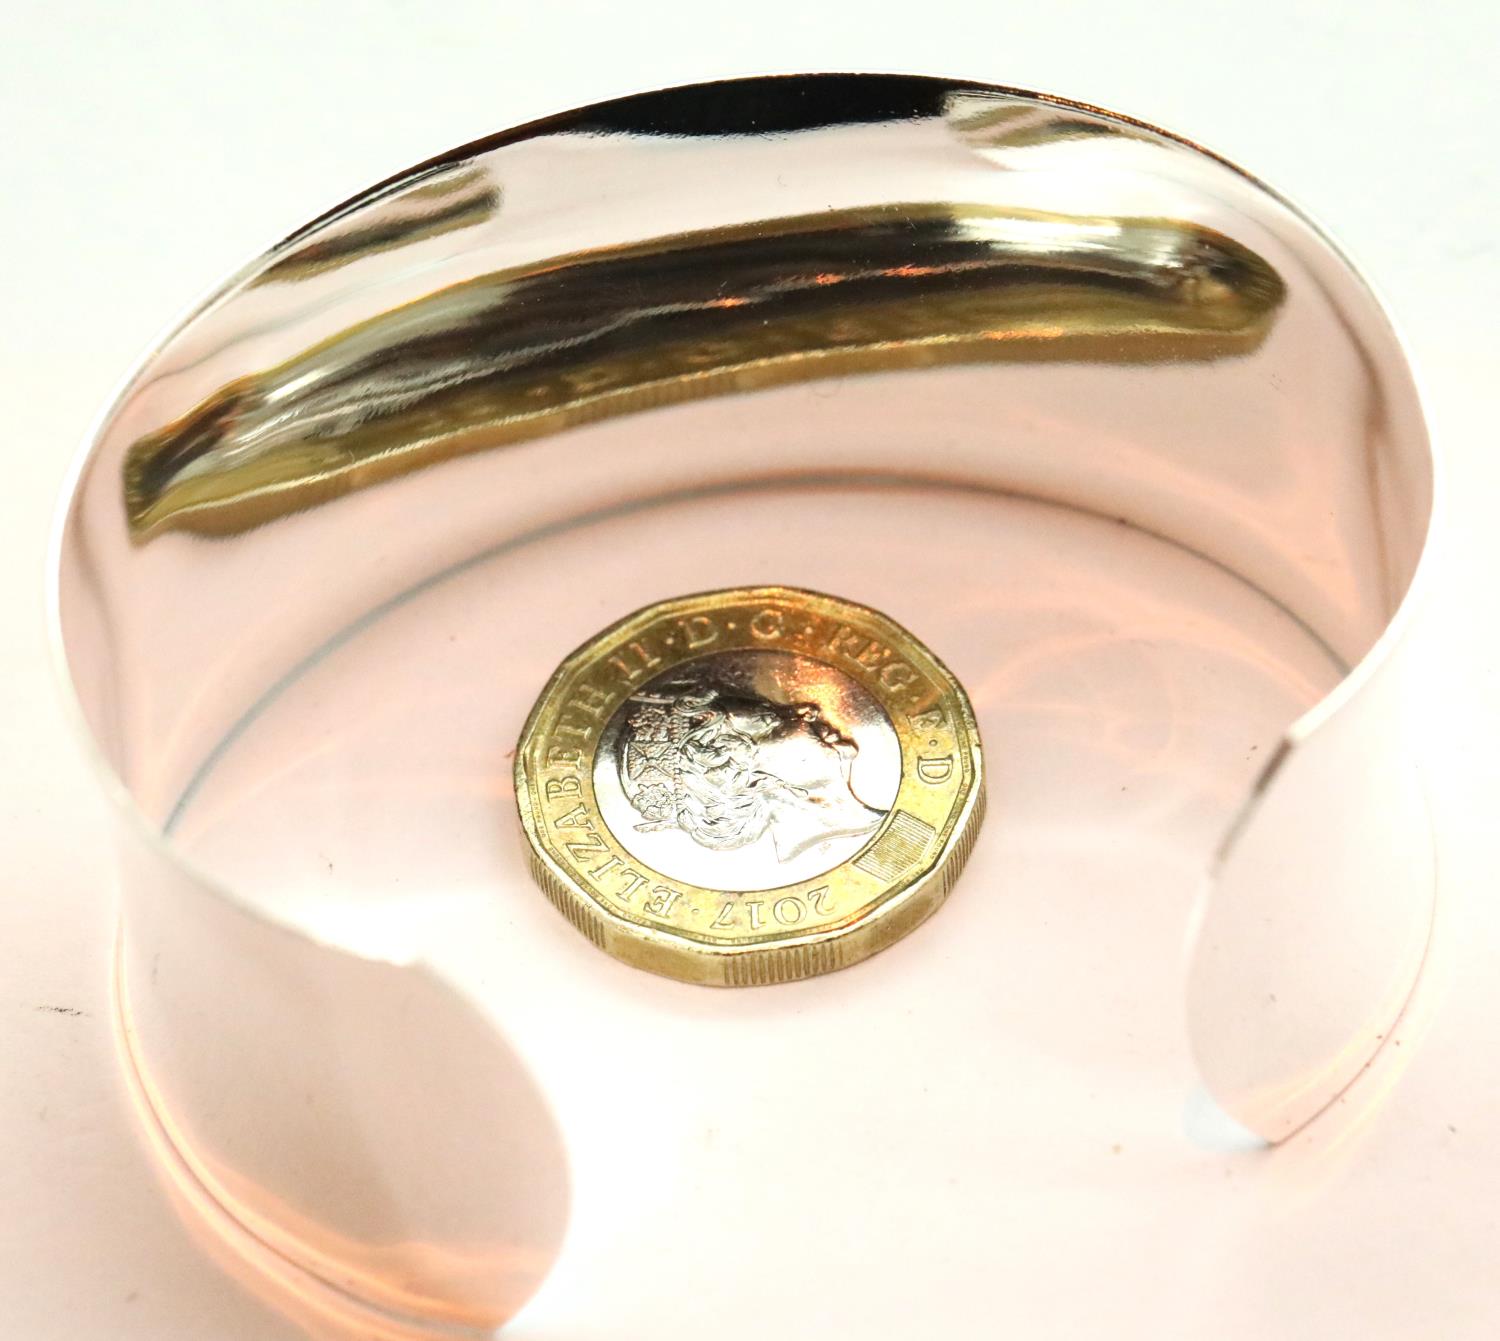 925 silver cuff bangle. P&P Group 1 (£14+VAT for the first lot and £1+VAT for subsequent lots)